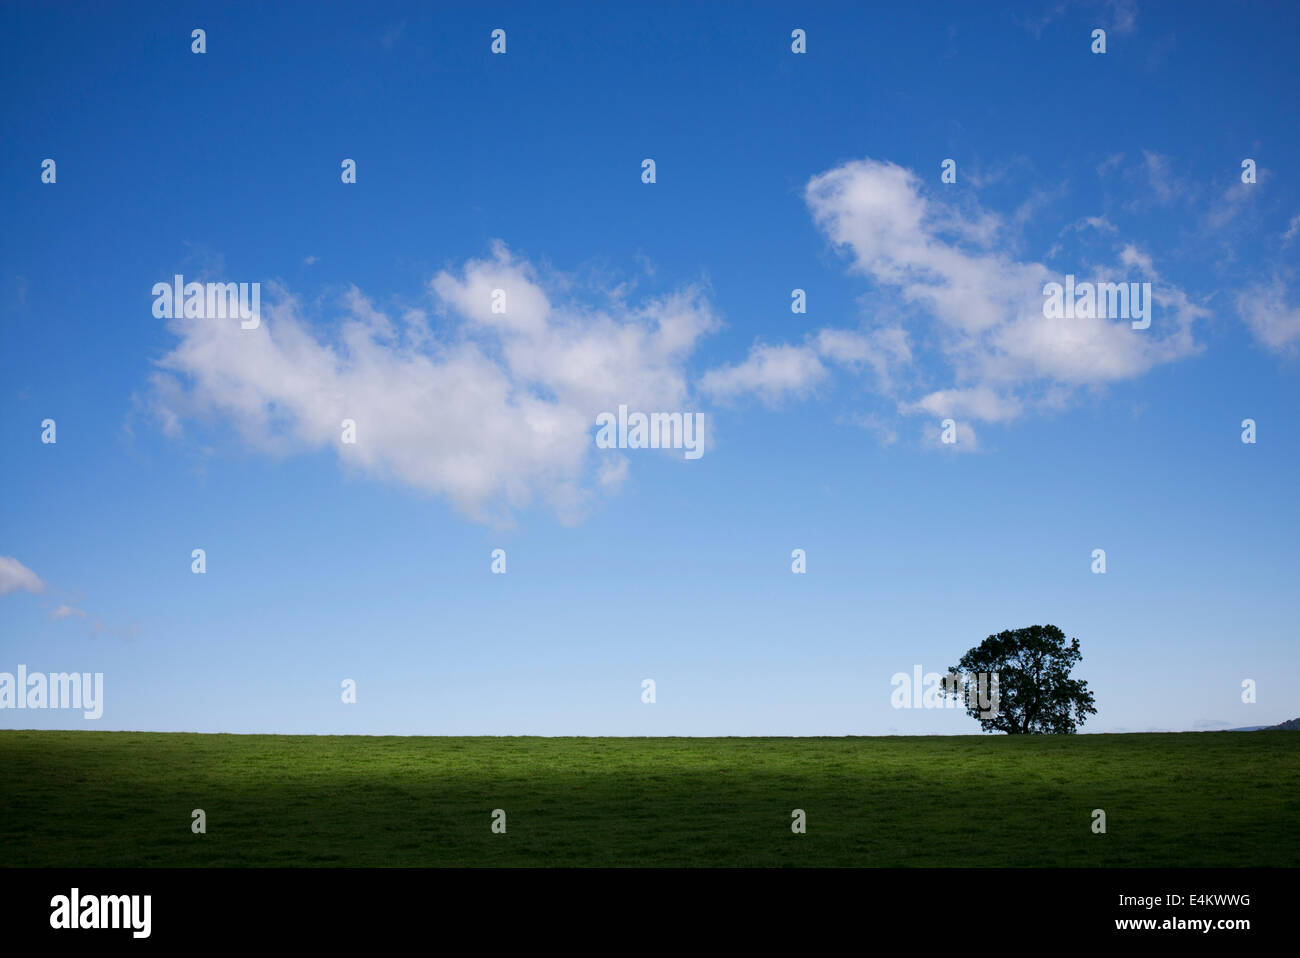 Tree silhouette on the horizon of a field with sunlight and shade in Scotland Stock Photo